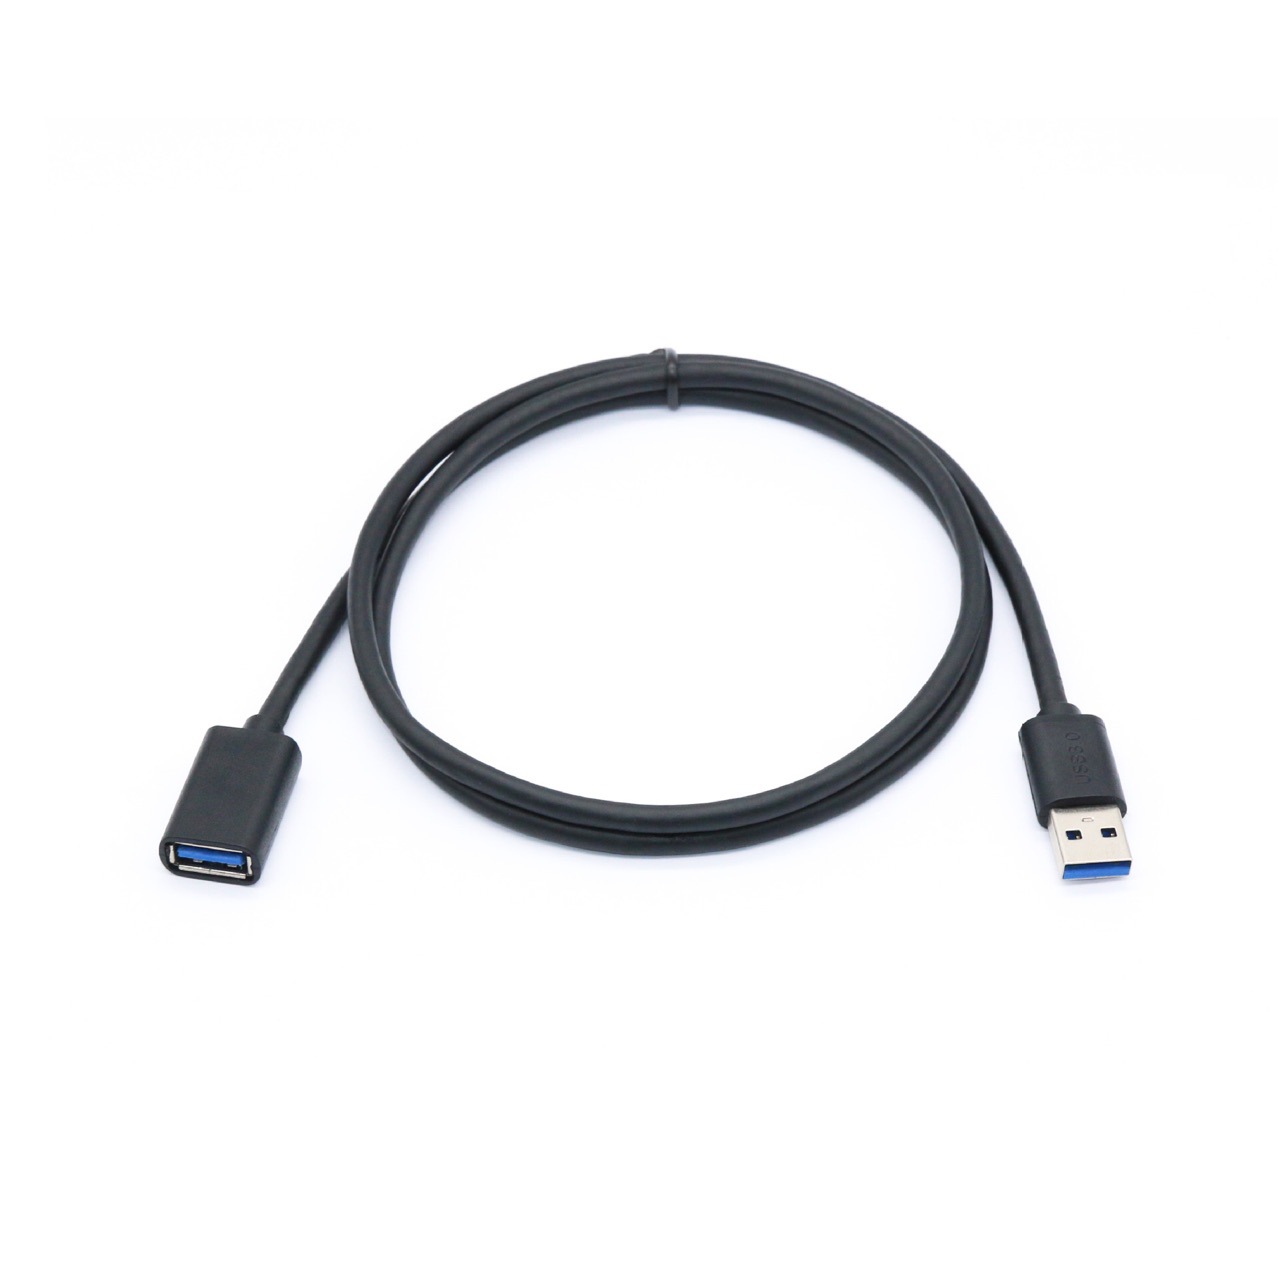 5Gbps 10 Gbps USB-A Male To Female Extension Cable